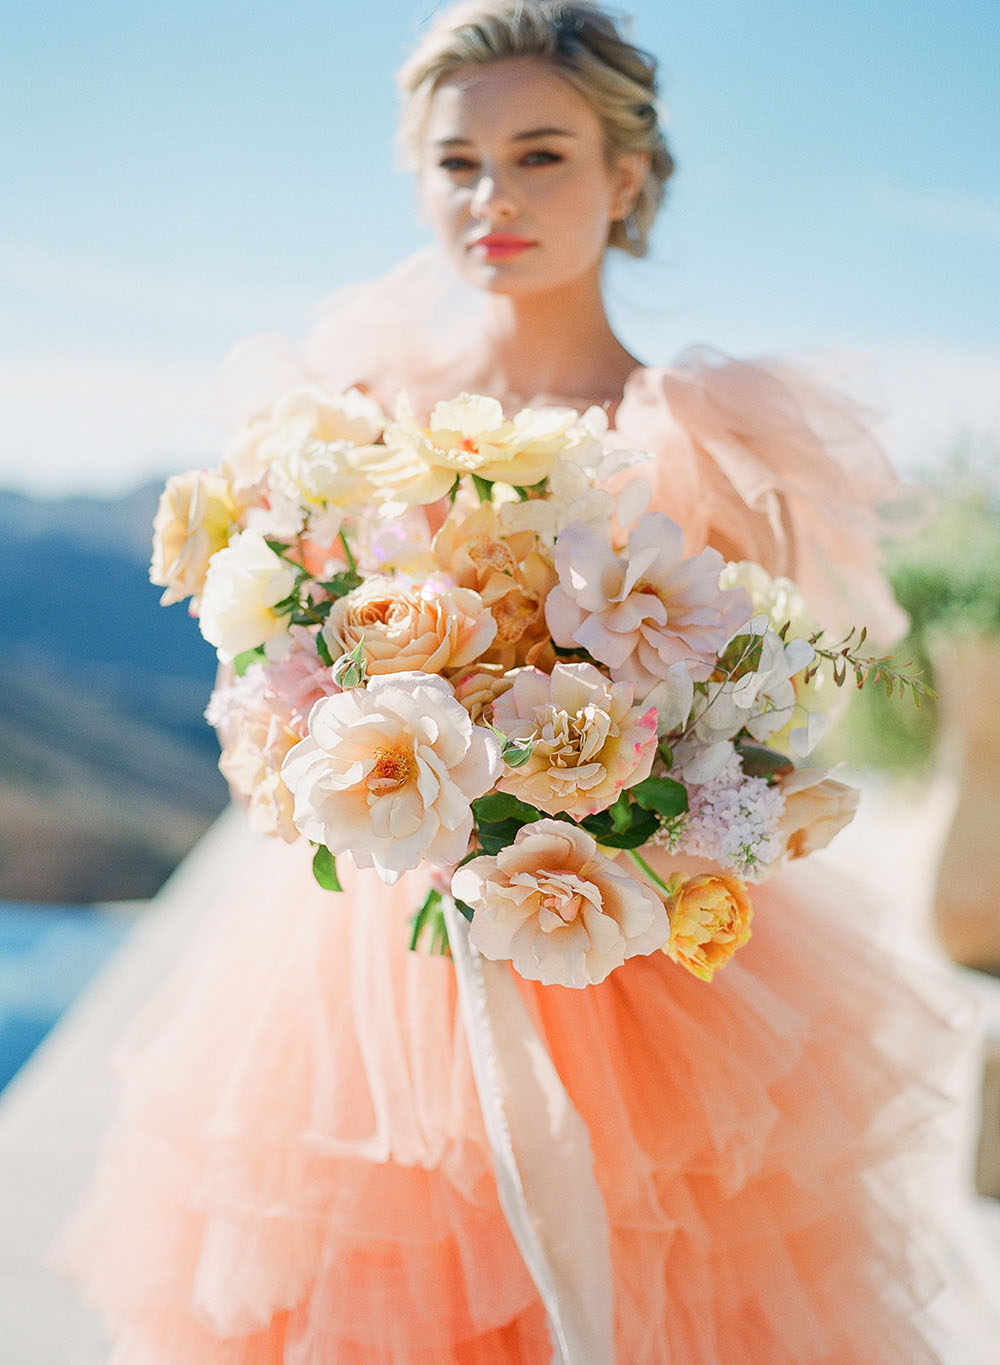 Dreamy Malibu Rocky Oaks wedding inspiration with two tulle gowns